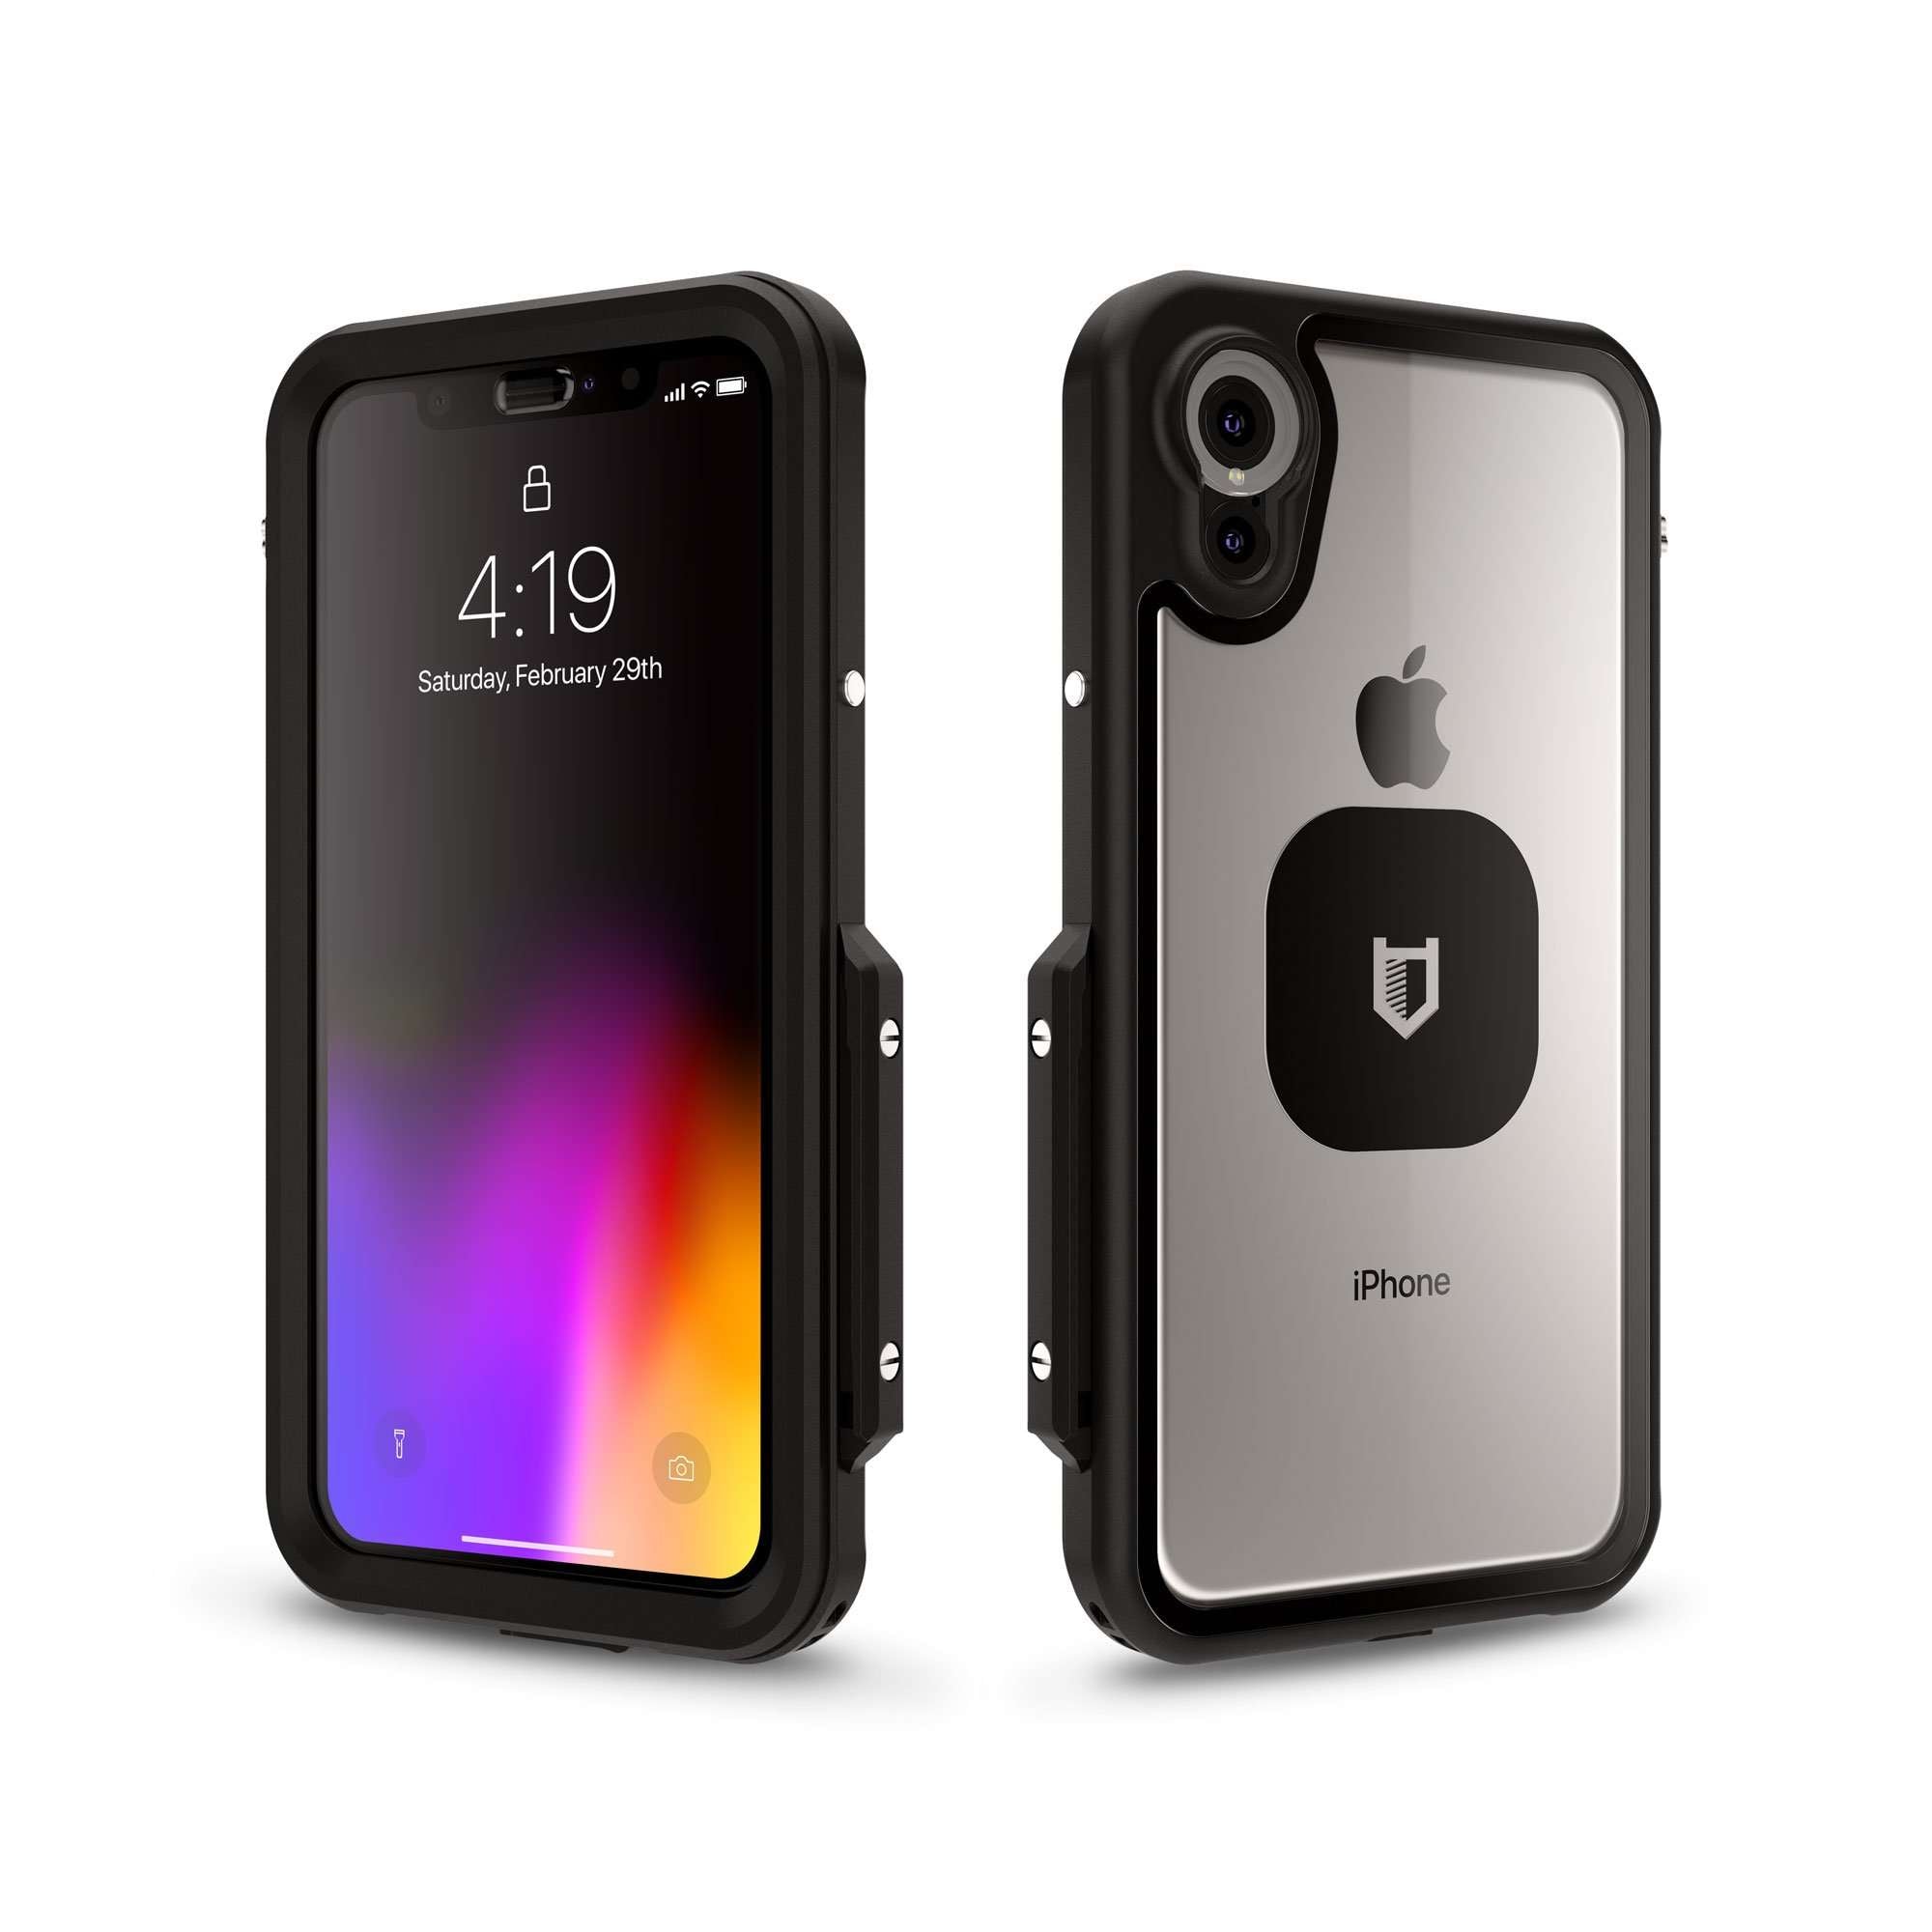  Eonfine for iPhone X Case,for iPhone Xs Case, Built-in Screen  Protector Full Body Protection Heavy Duty Shockproof Rugged Cover Skin for  iPhone X/Xs 5.8inch (Black/Clear) : Cell Phones & Accessories